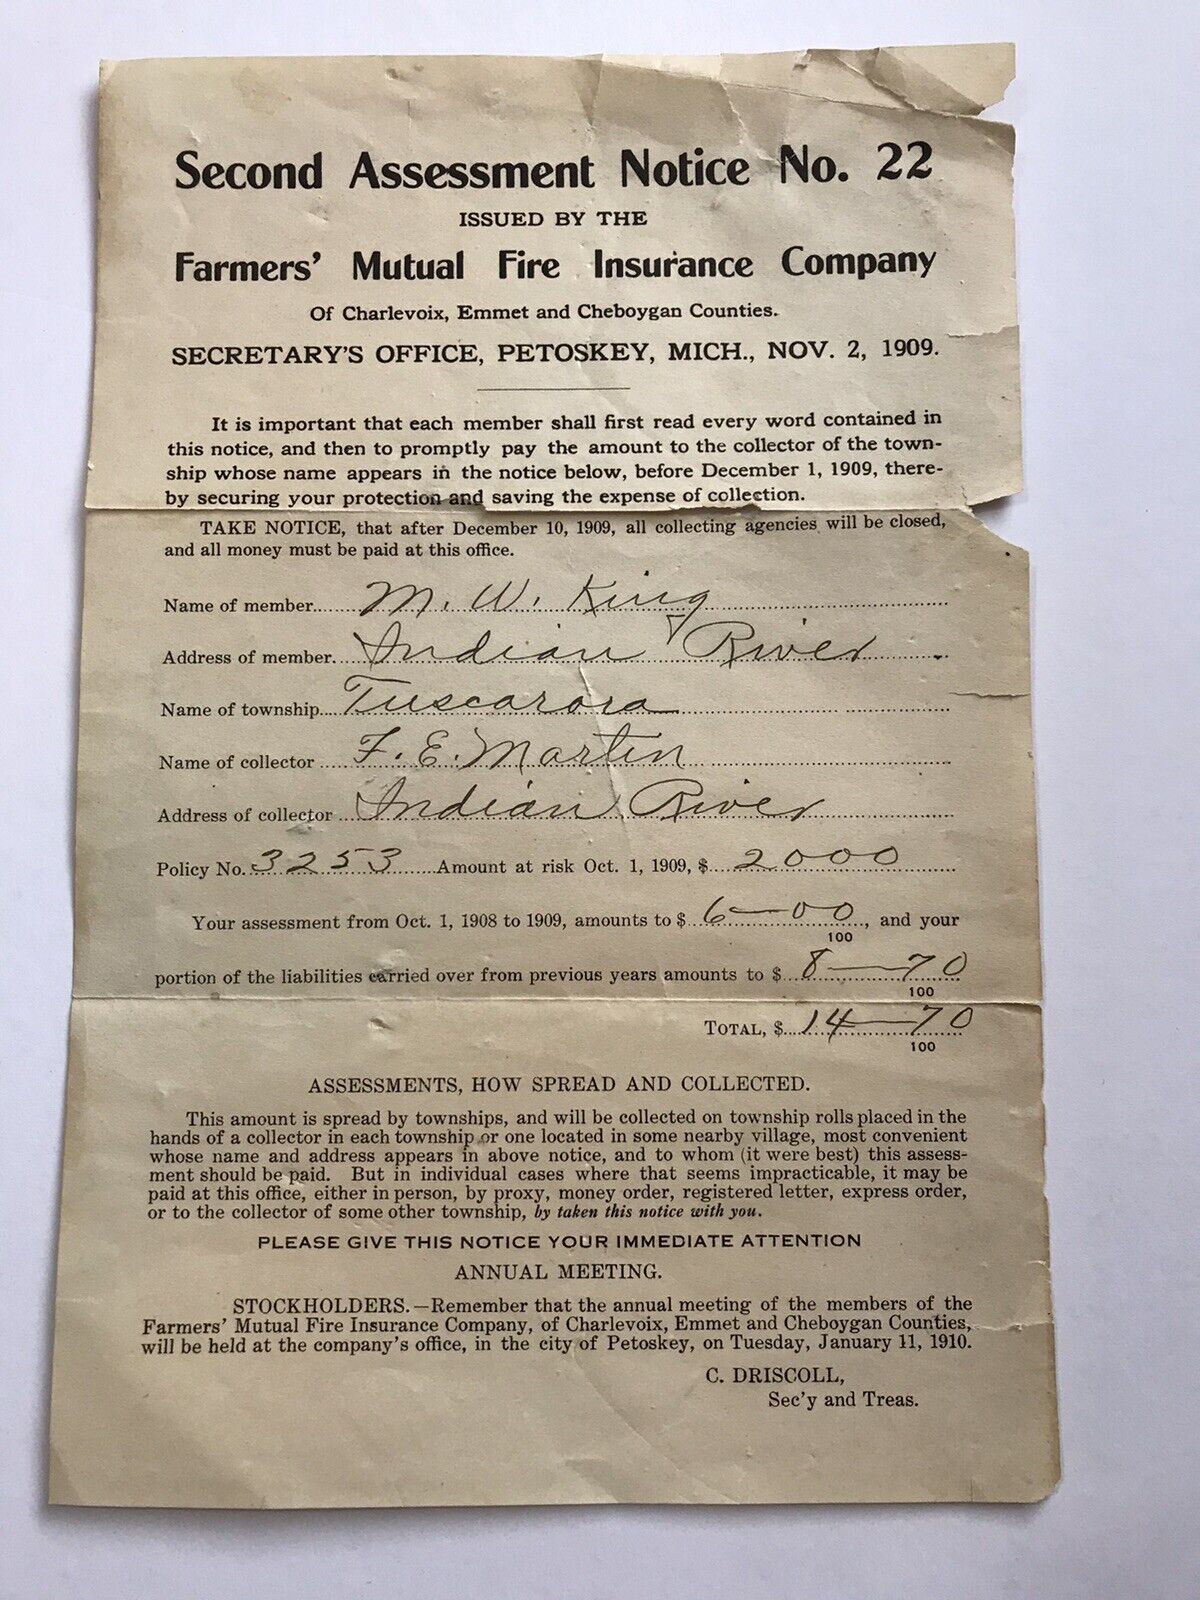 Farmers Mutual Fire Insurance Company 1909 Invoice Second Assessment Notice